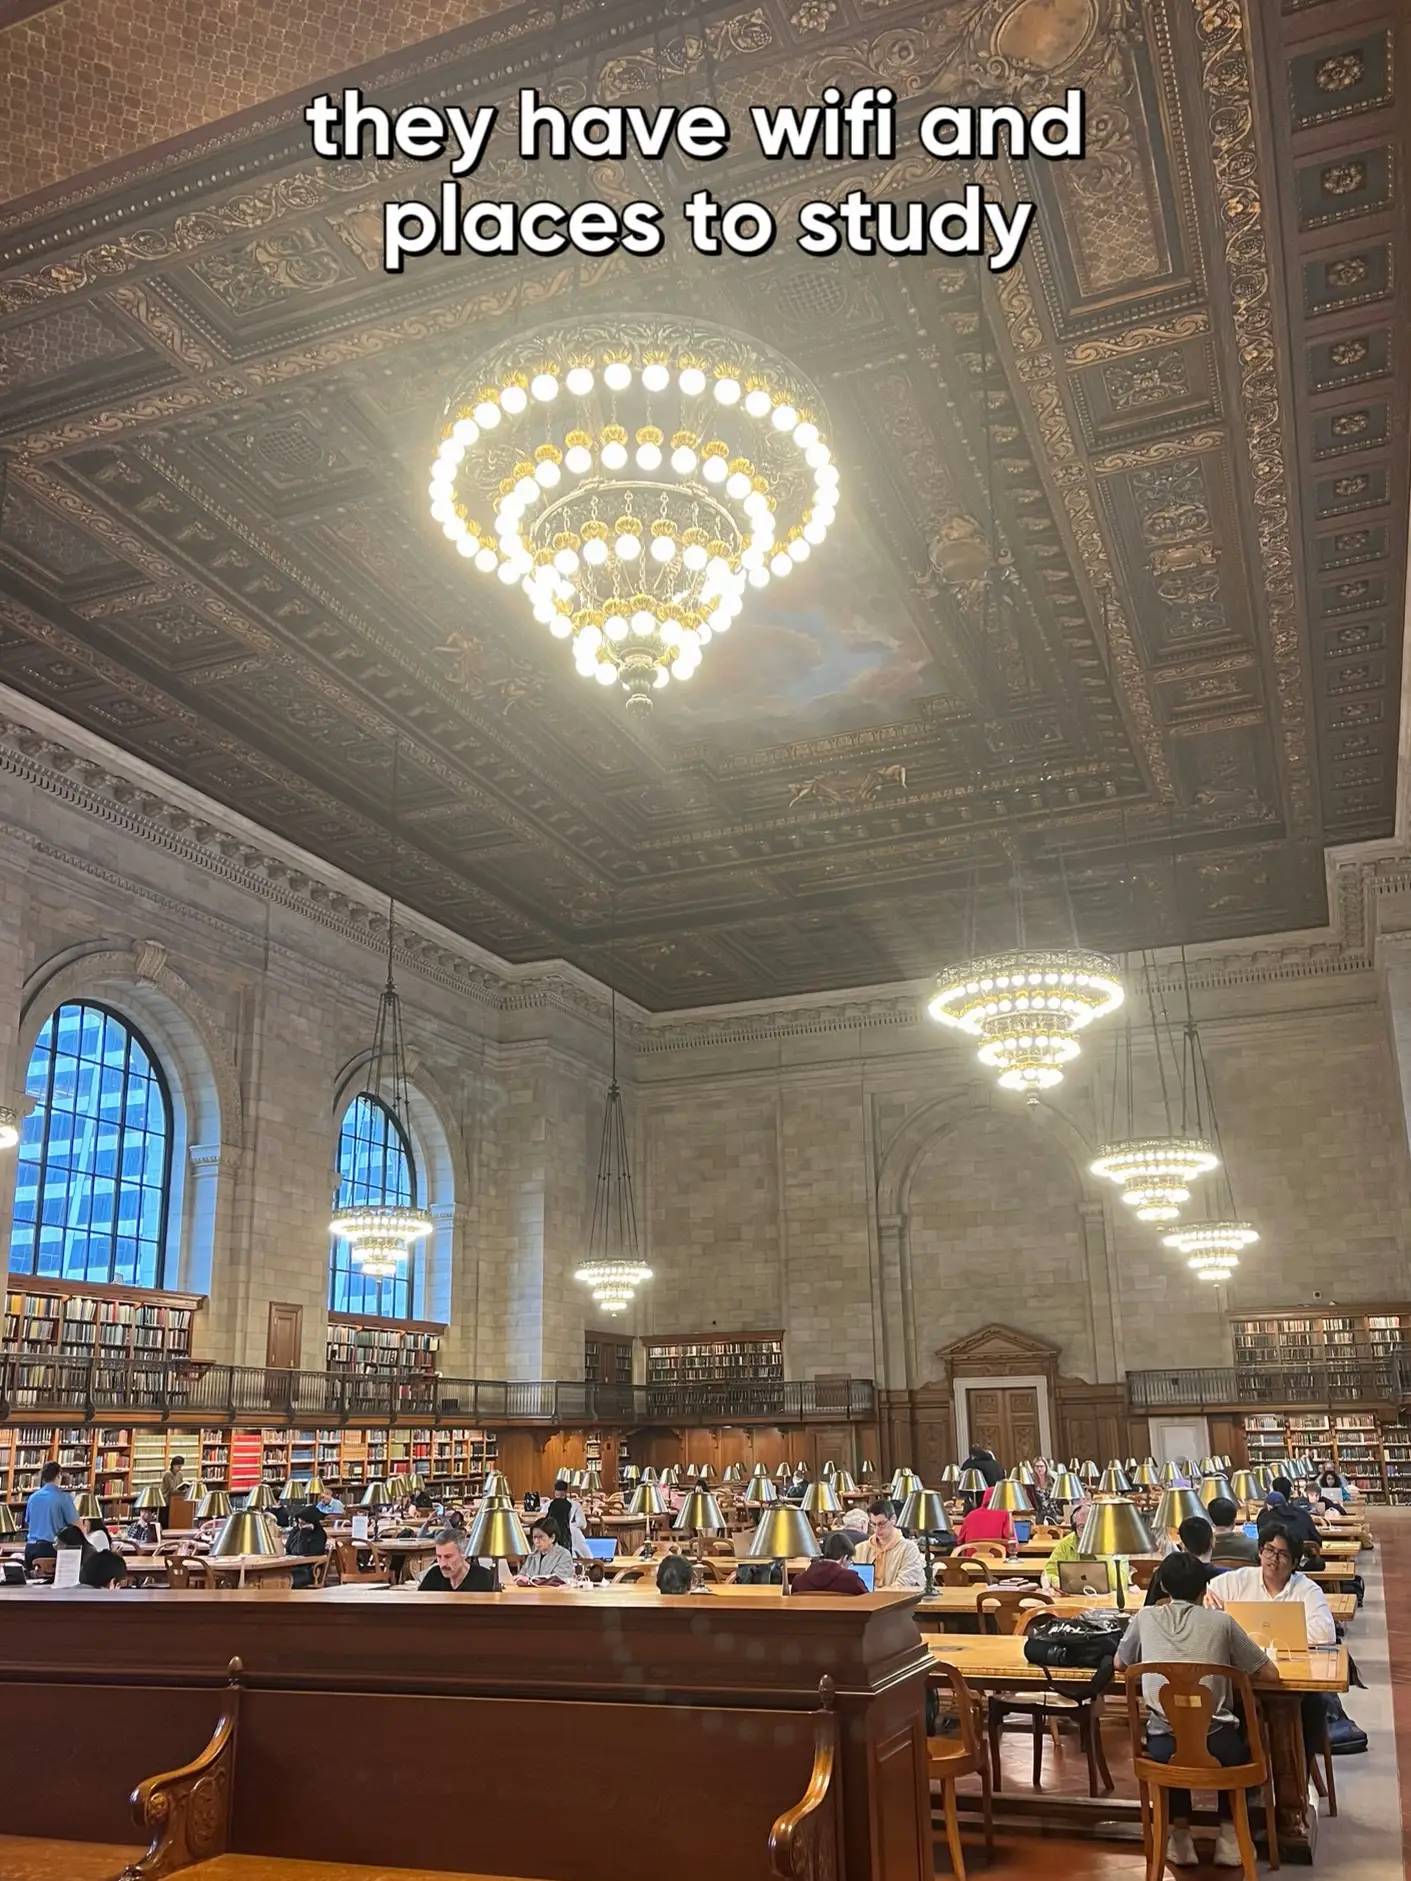  A library with a large number of books and people studying.